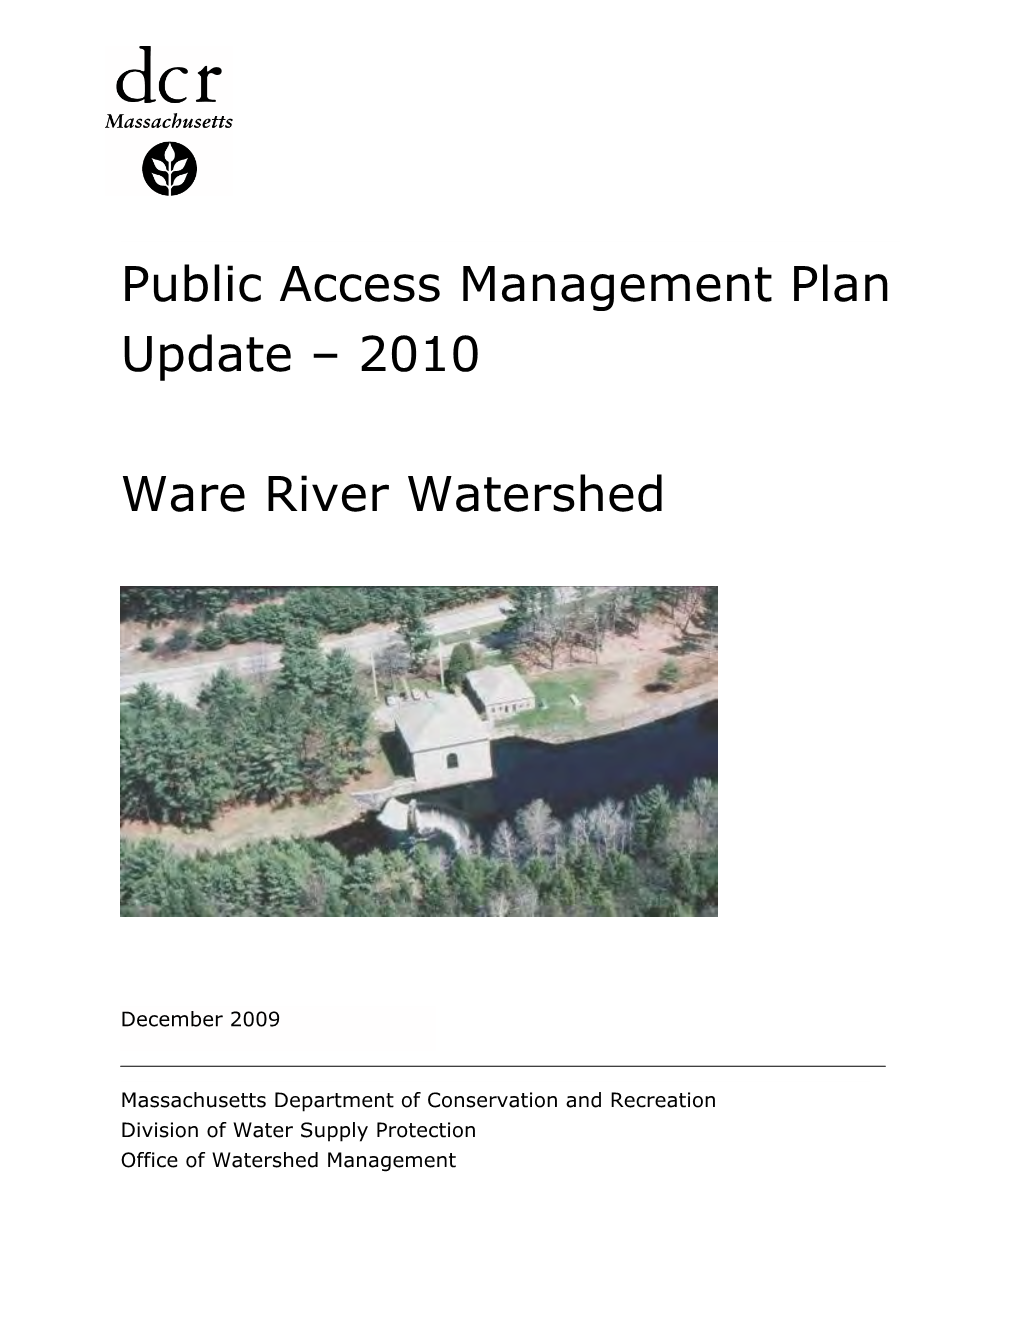 2010 Ware River Watershed Access Plan